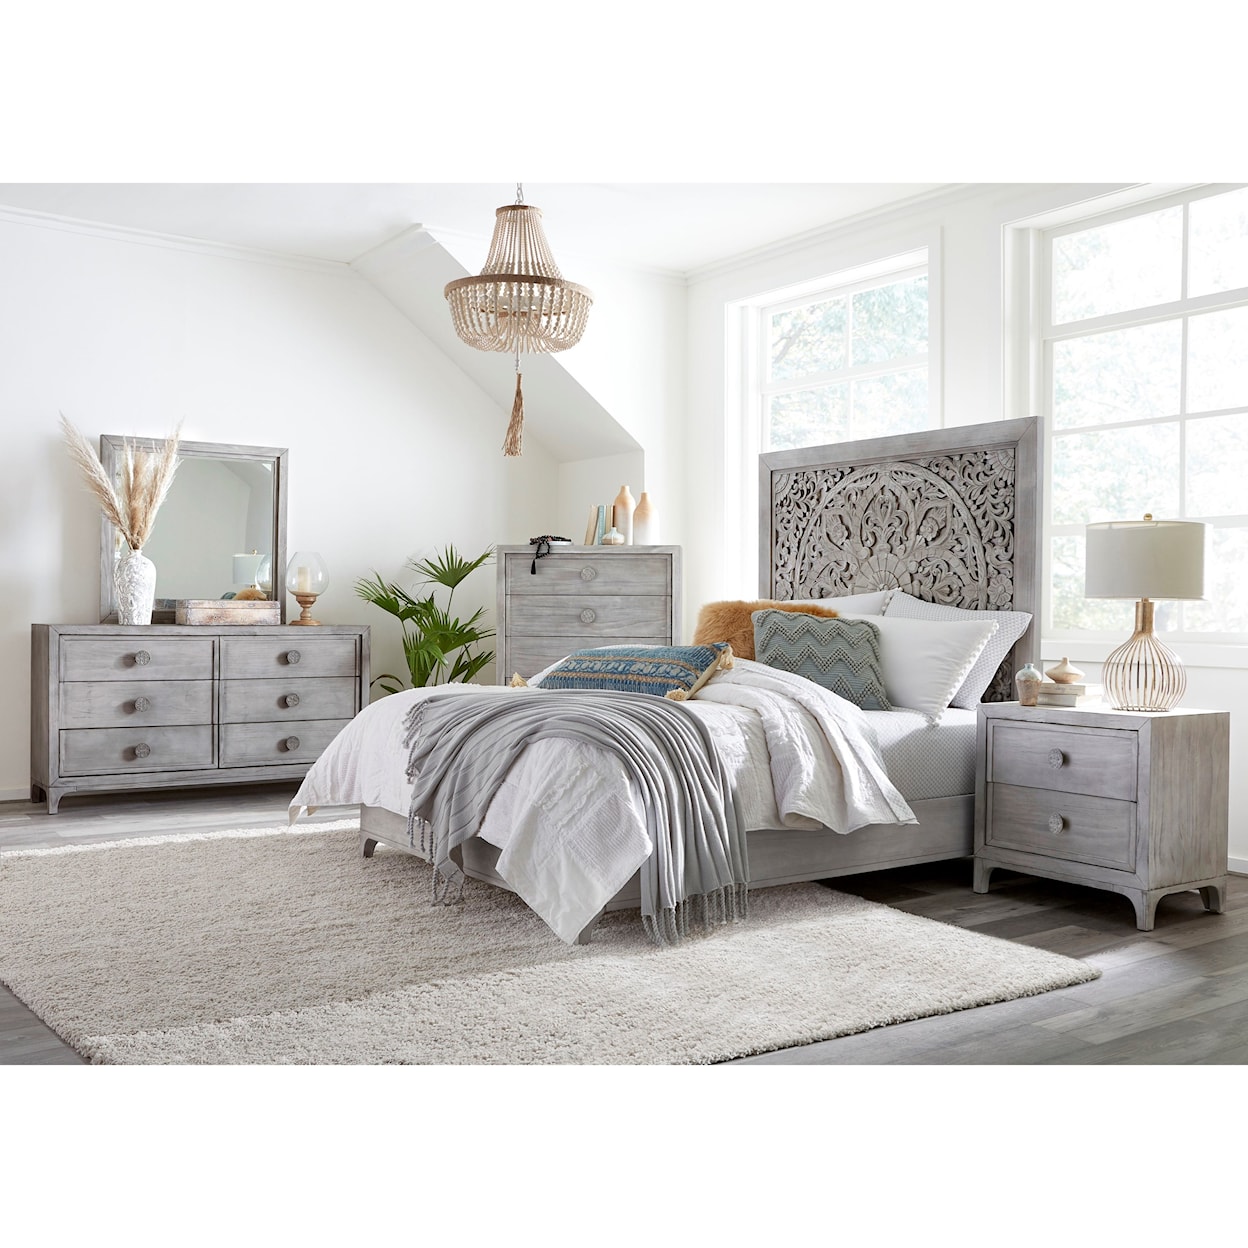 Modus International Boho Chic Nighstand in Washed White